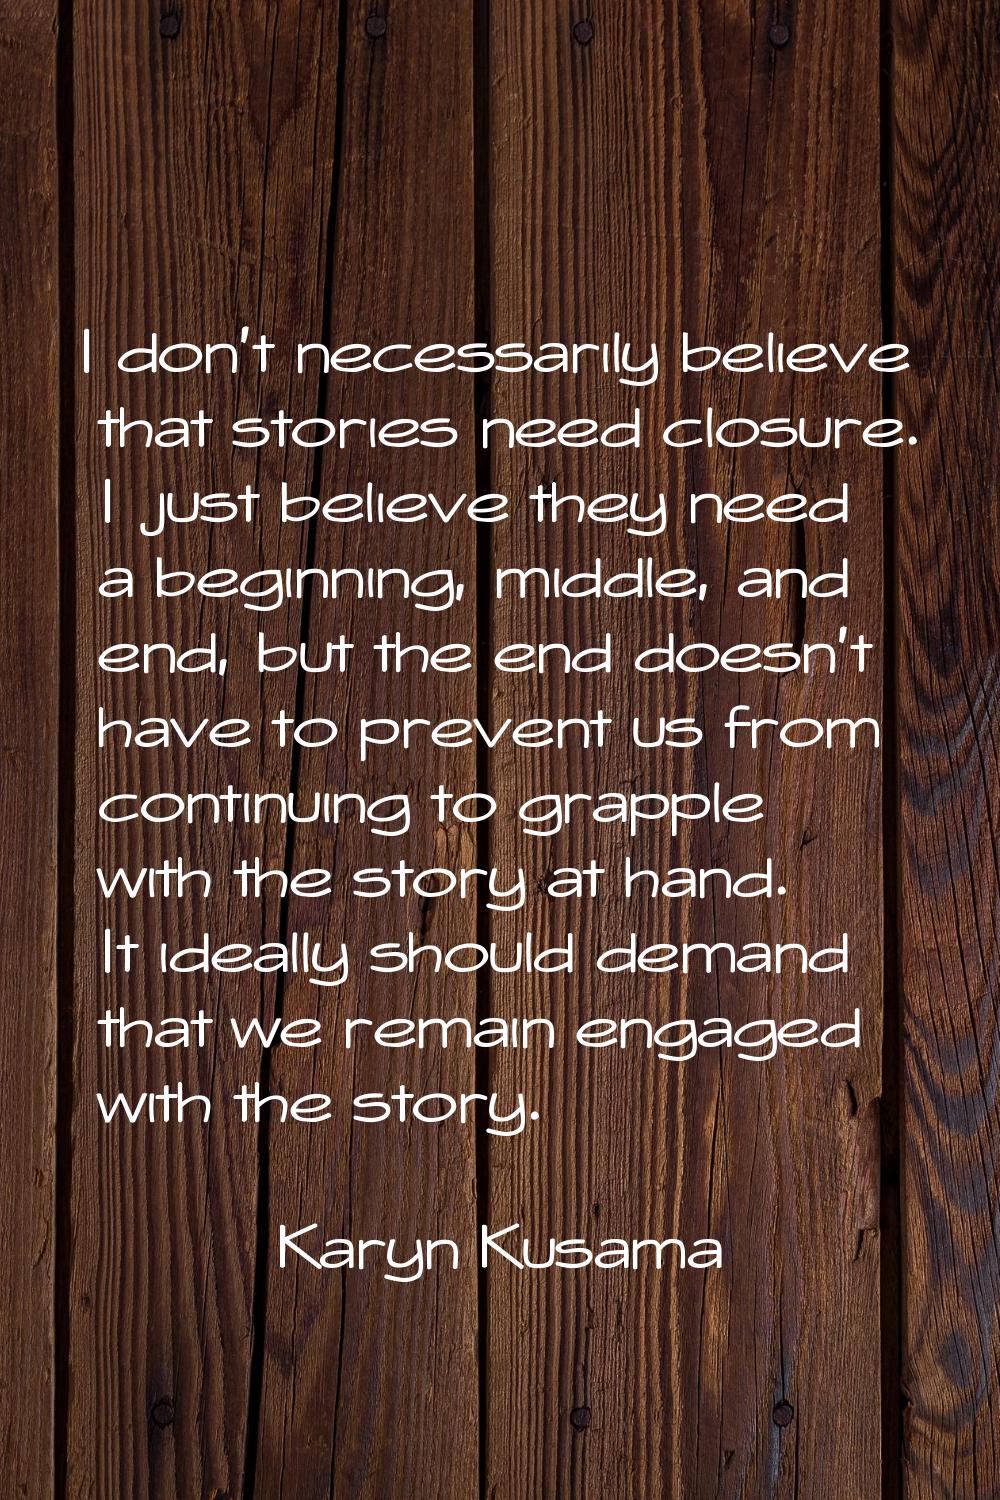 I don't necessarily believe that stories need closure. I just believe they need a beginning, middle